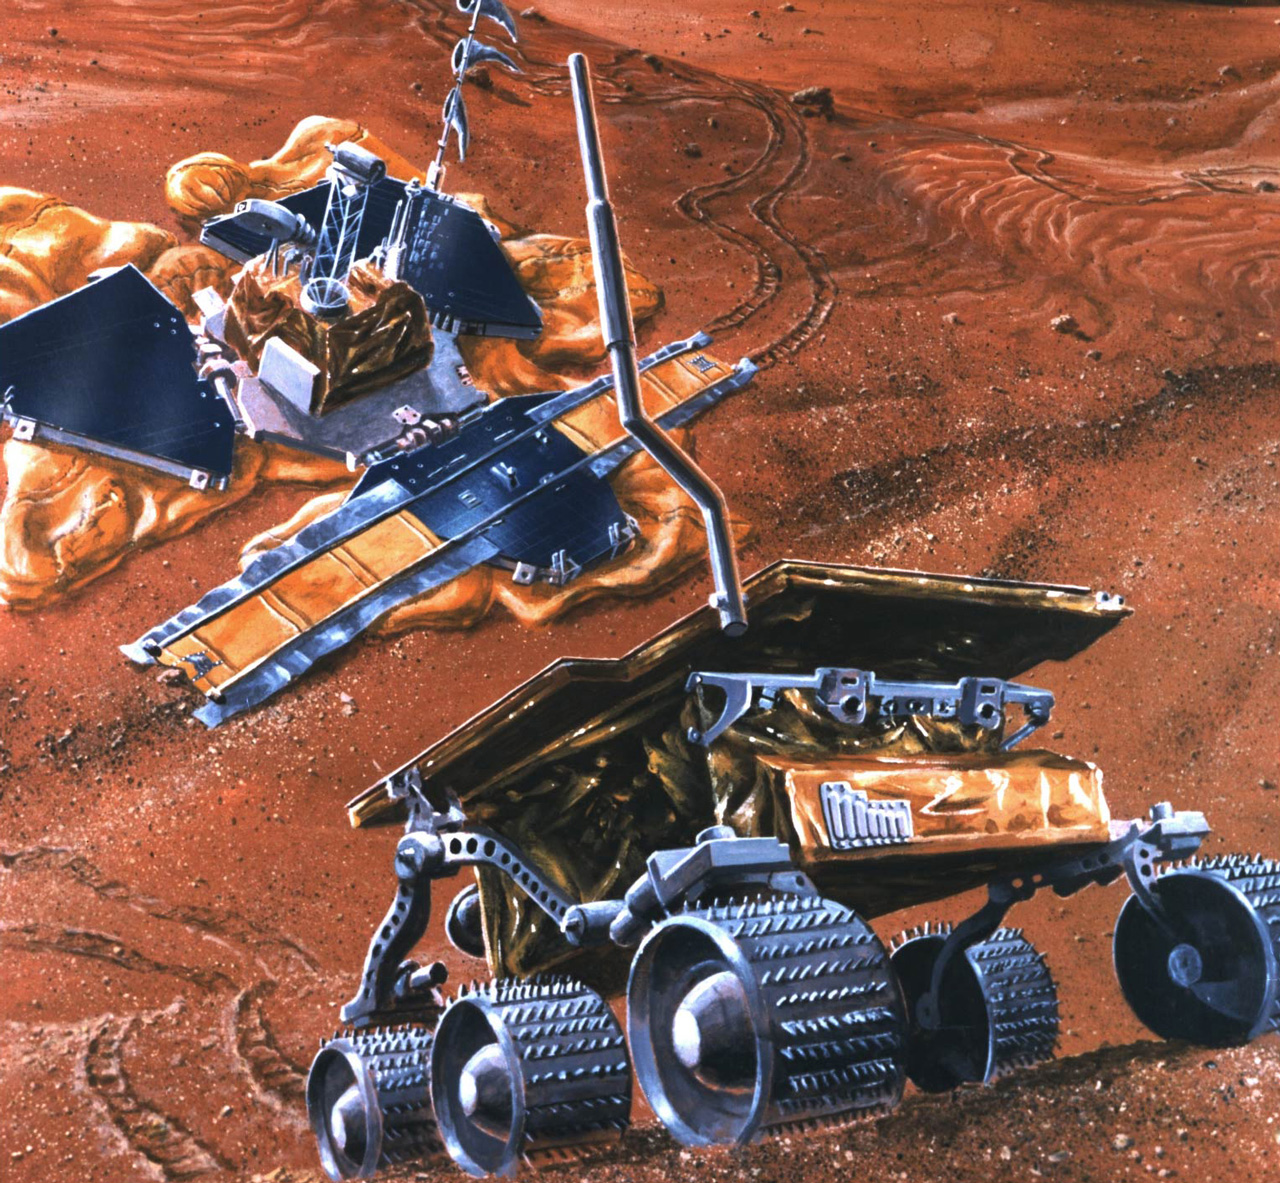 Rover climbing hill on Mars with science station behind it.